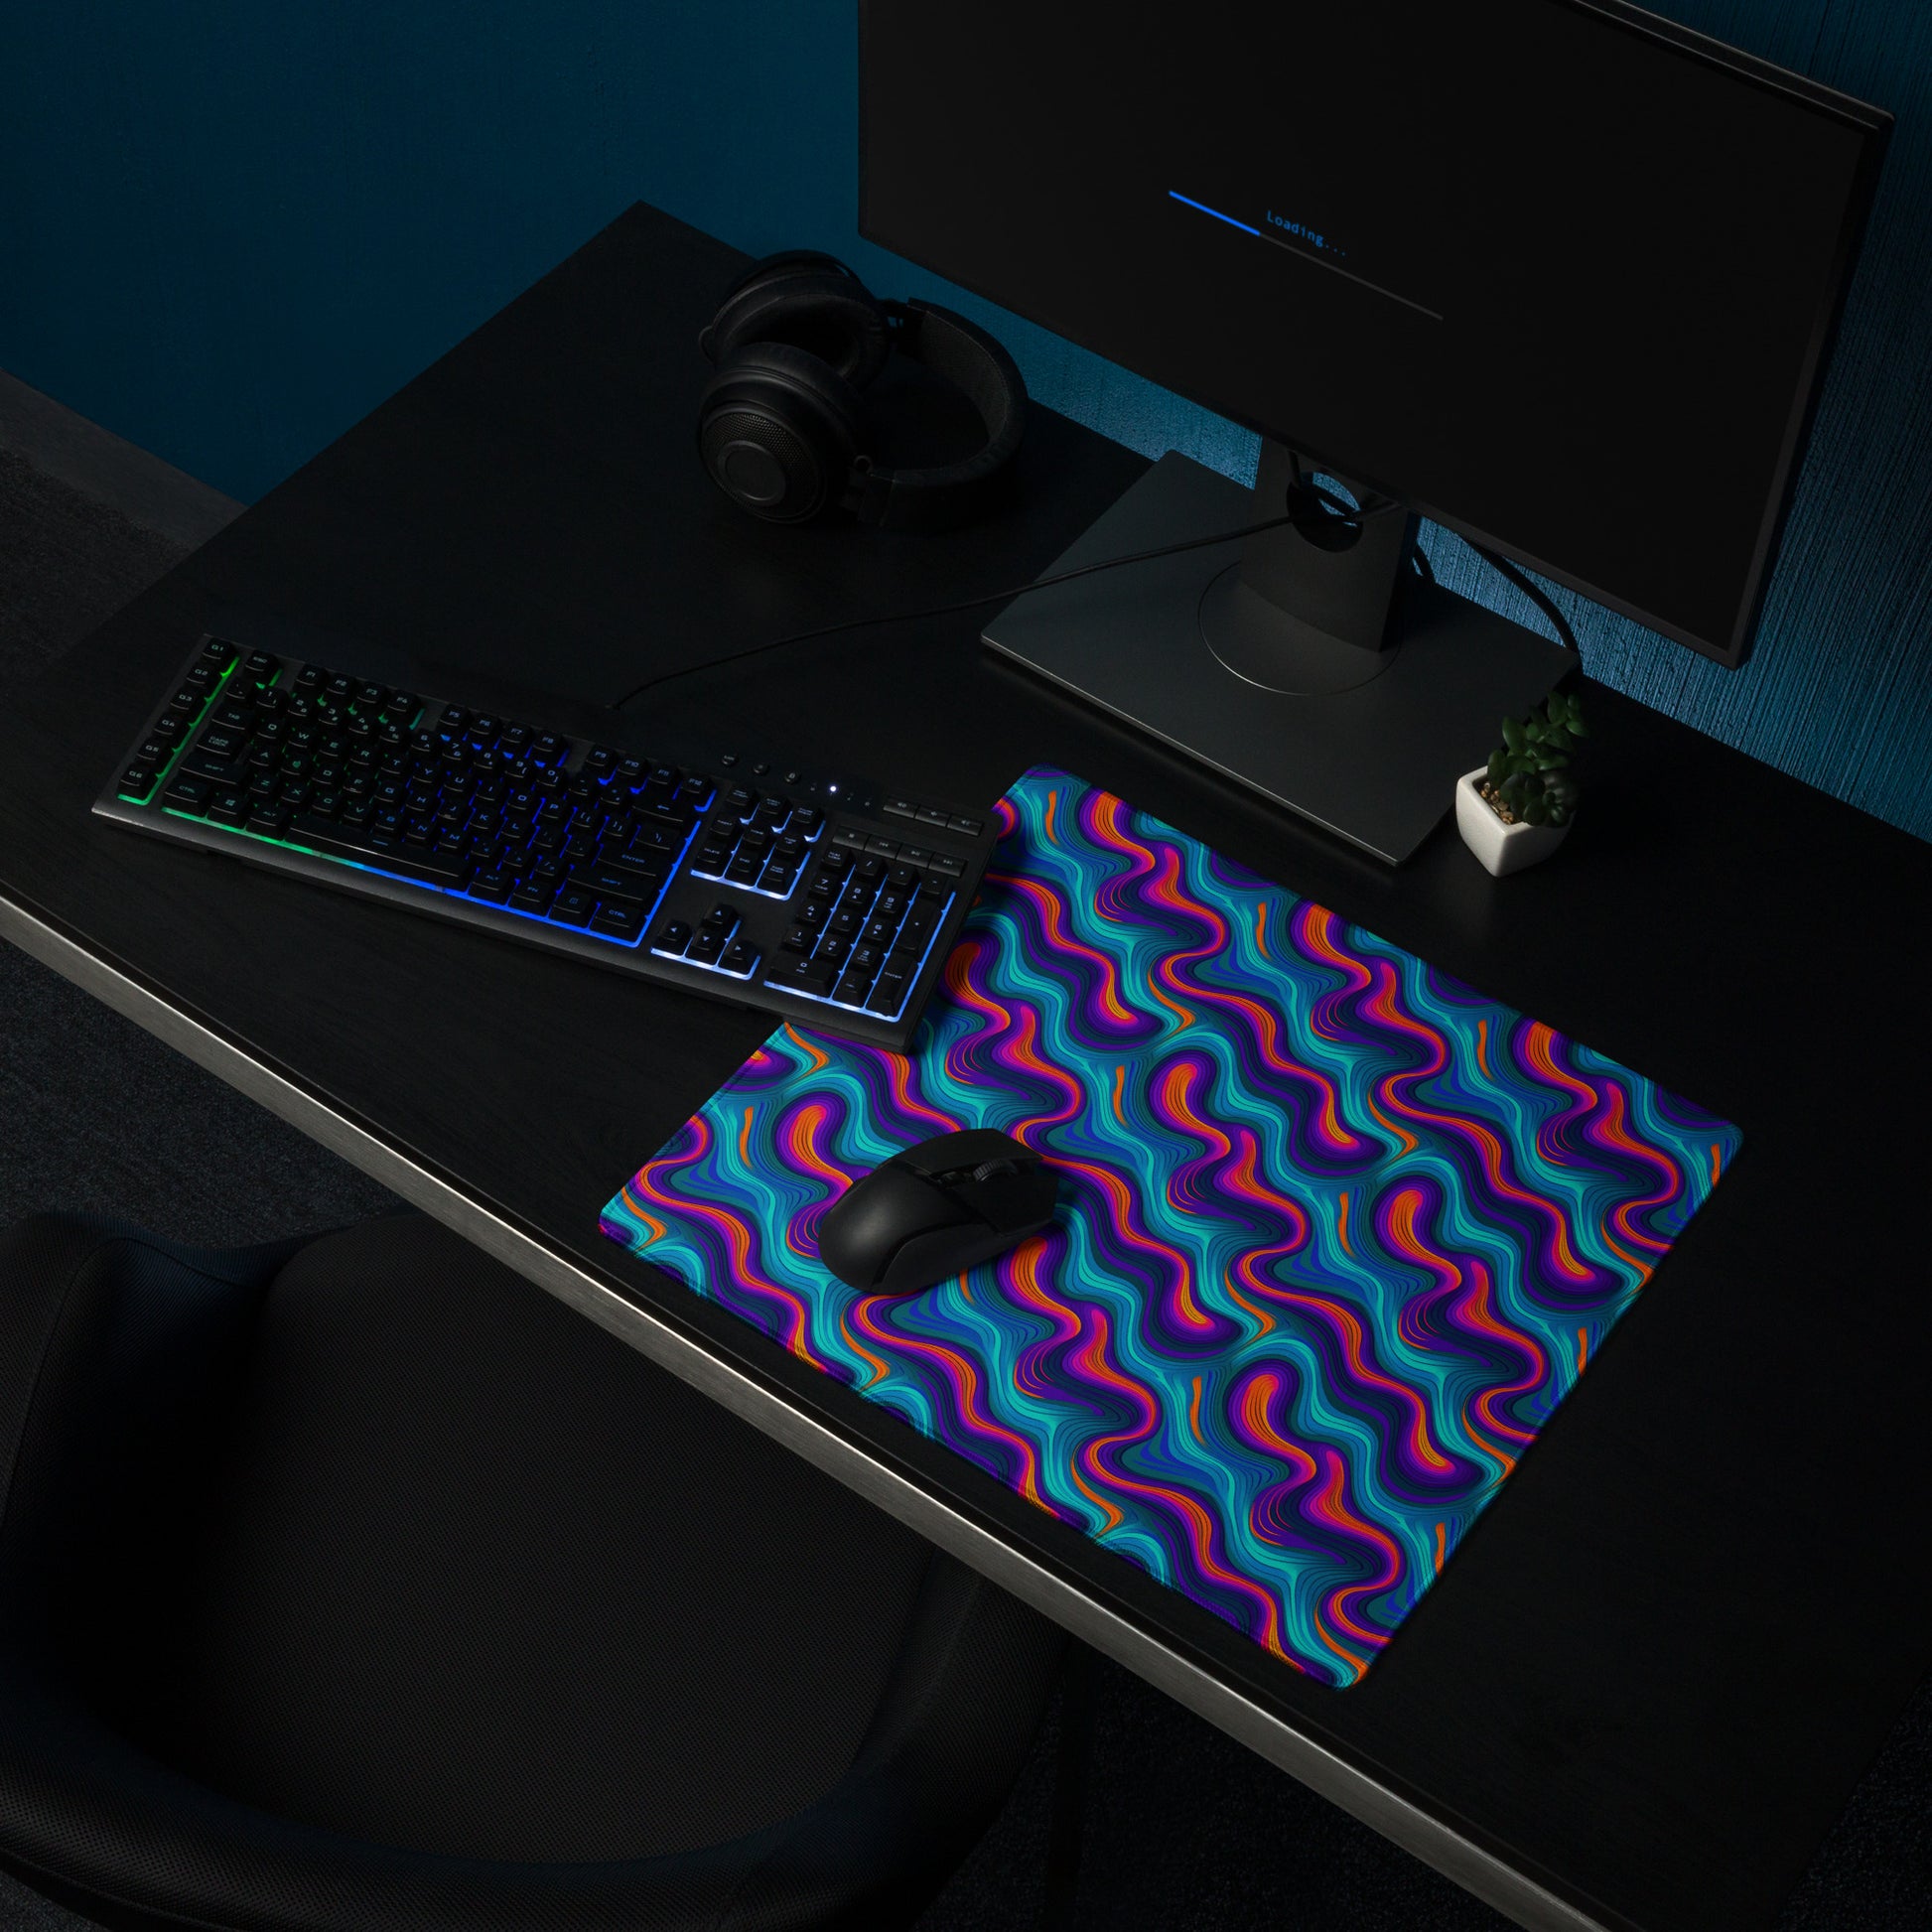 A 18" x 16" desk pad with blue and orange wavy pattern sitting on a desk.